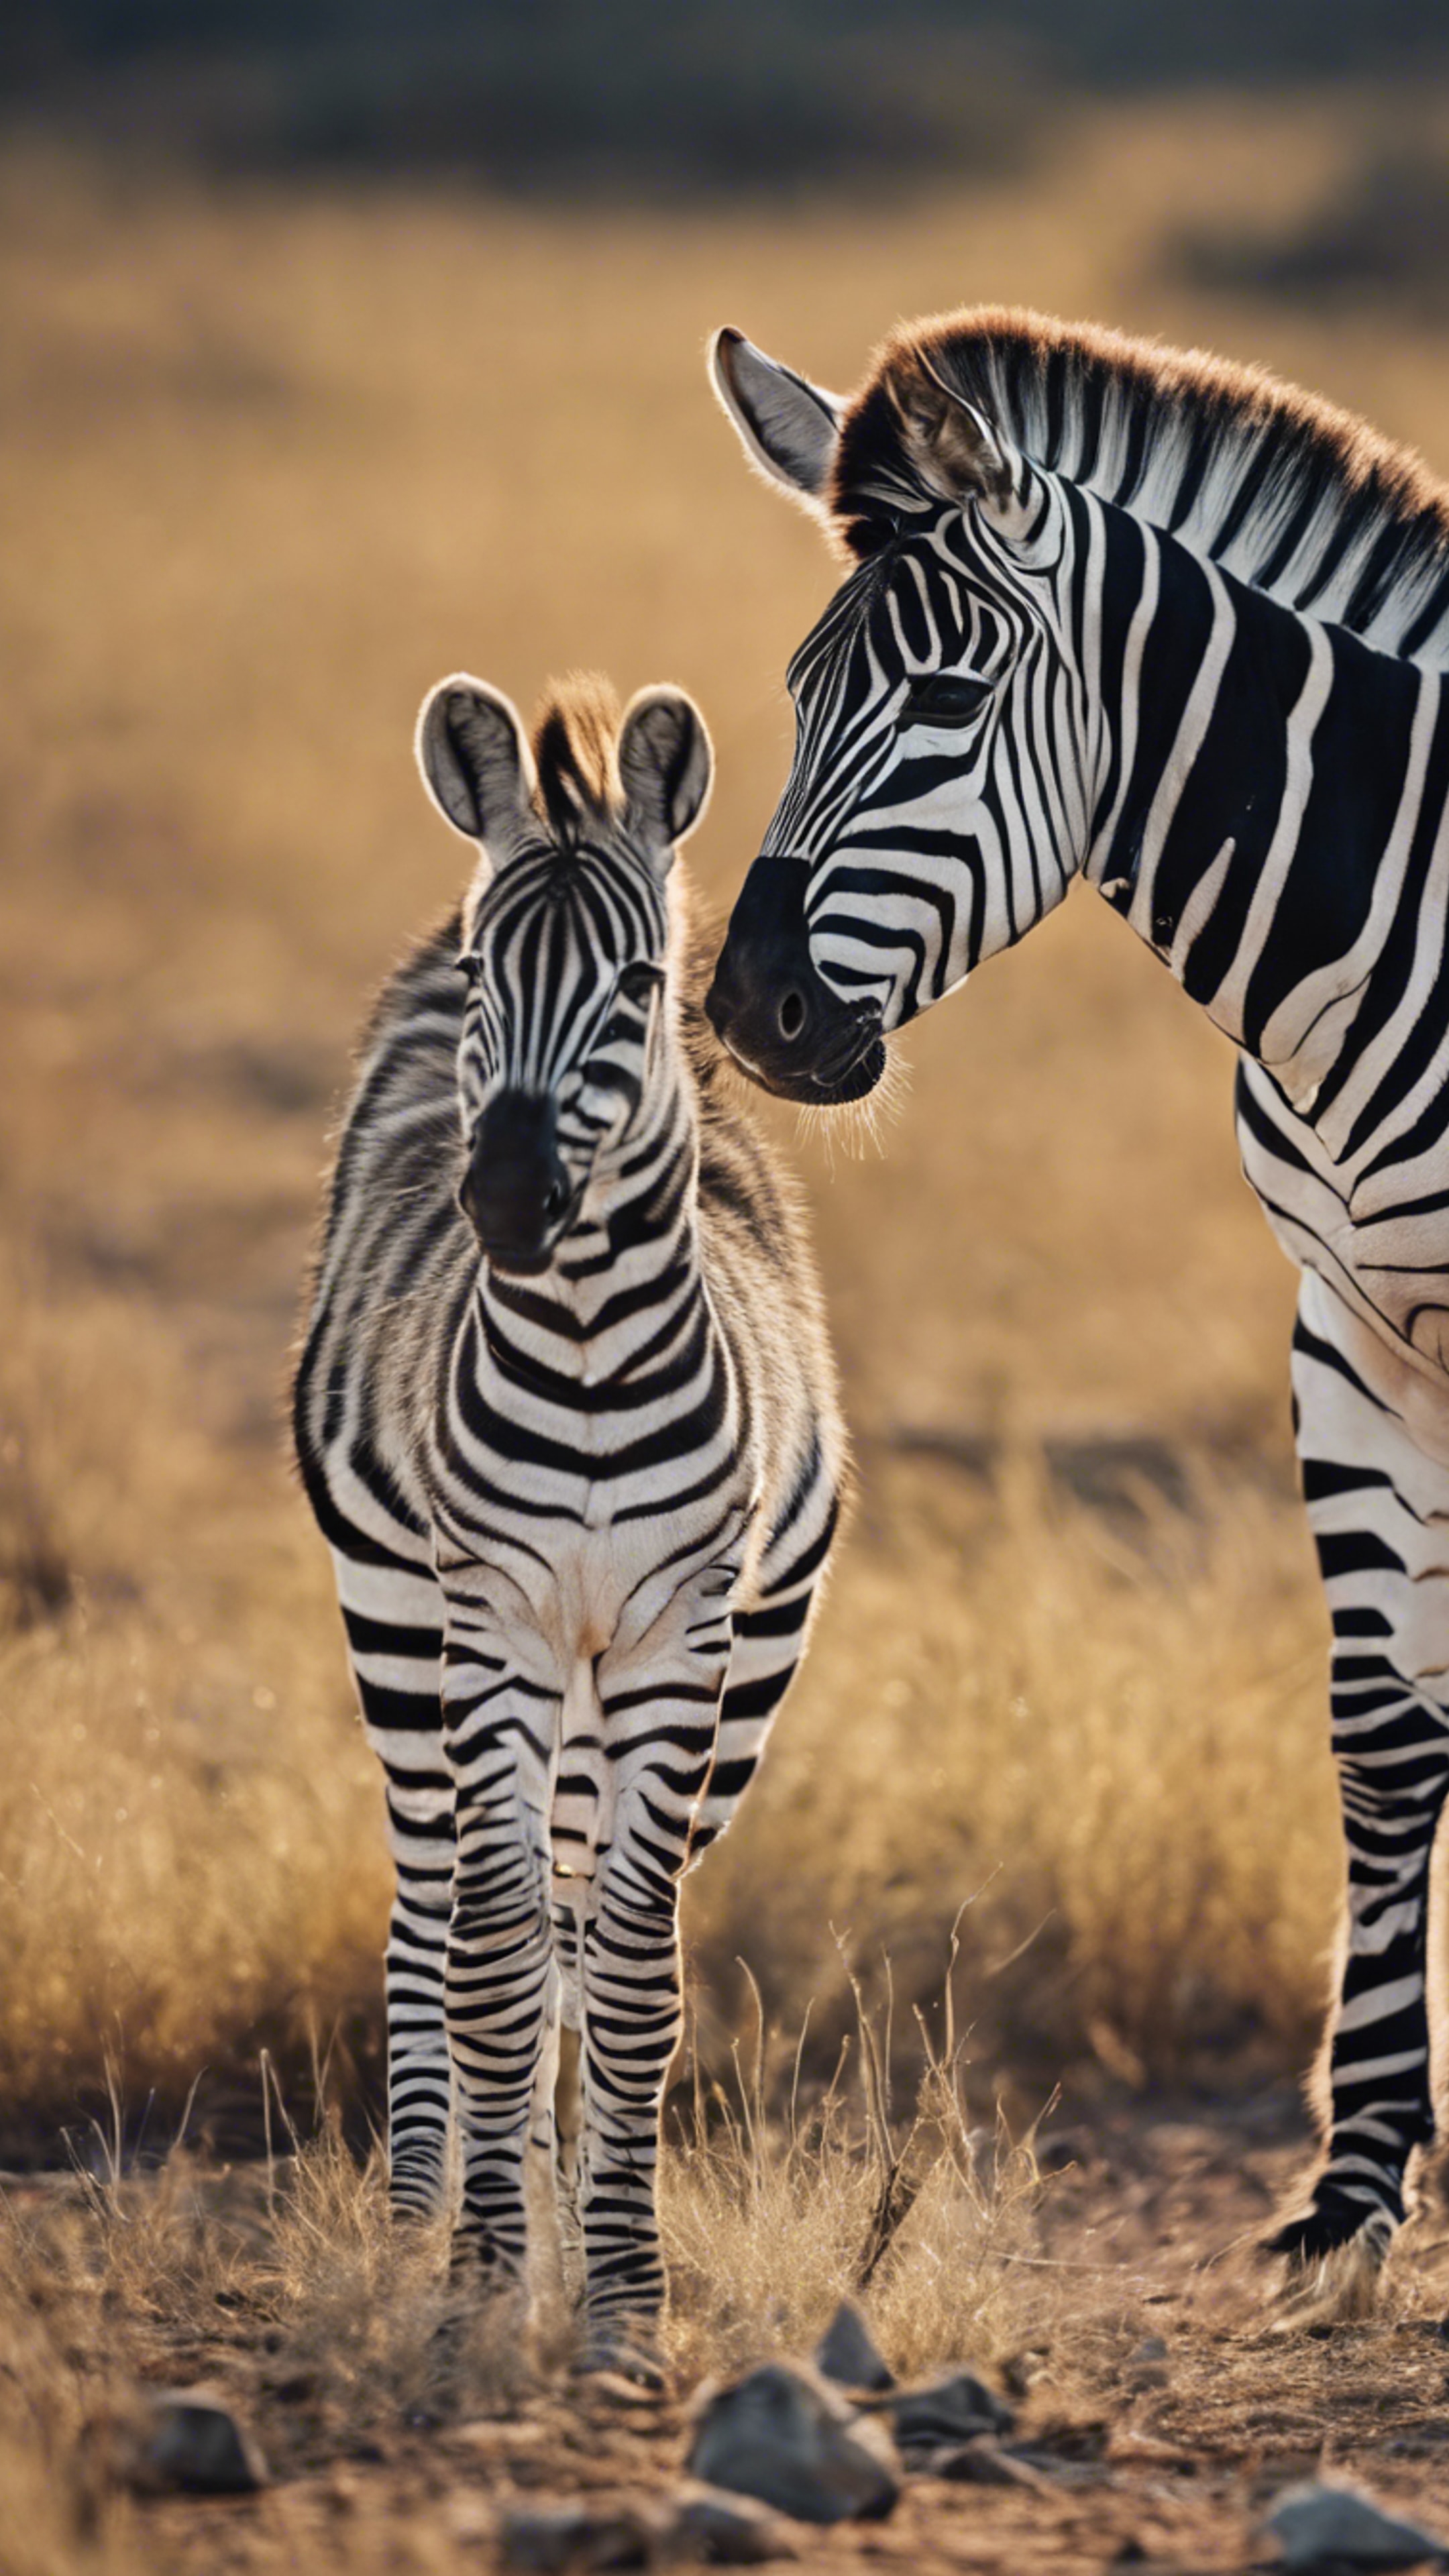 An adult zebra protectively standing over its newborn in the beautiful wild. Wallpaper[8c6d6e6d73ee4968a49c]